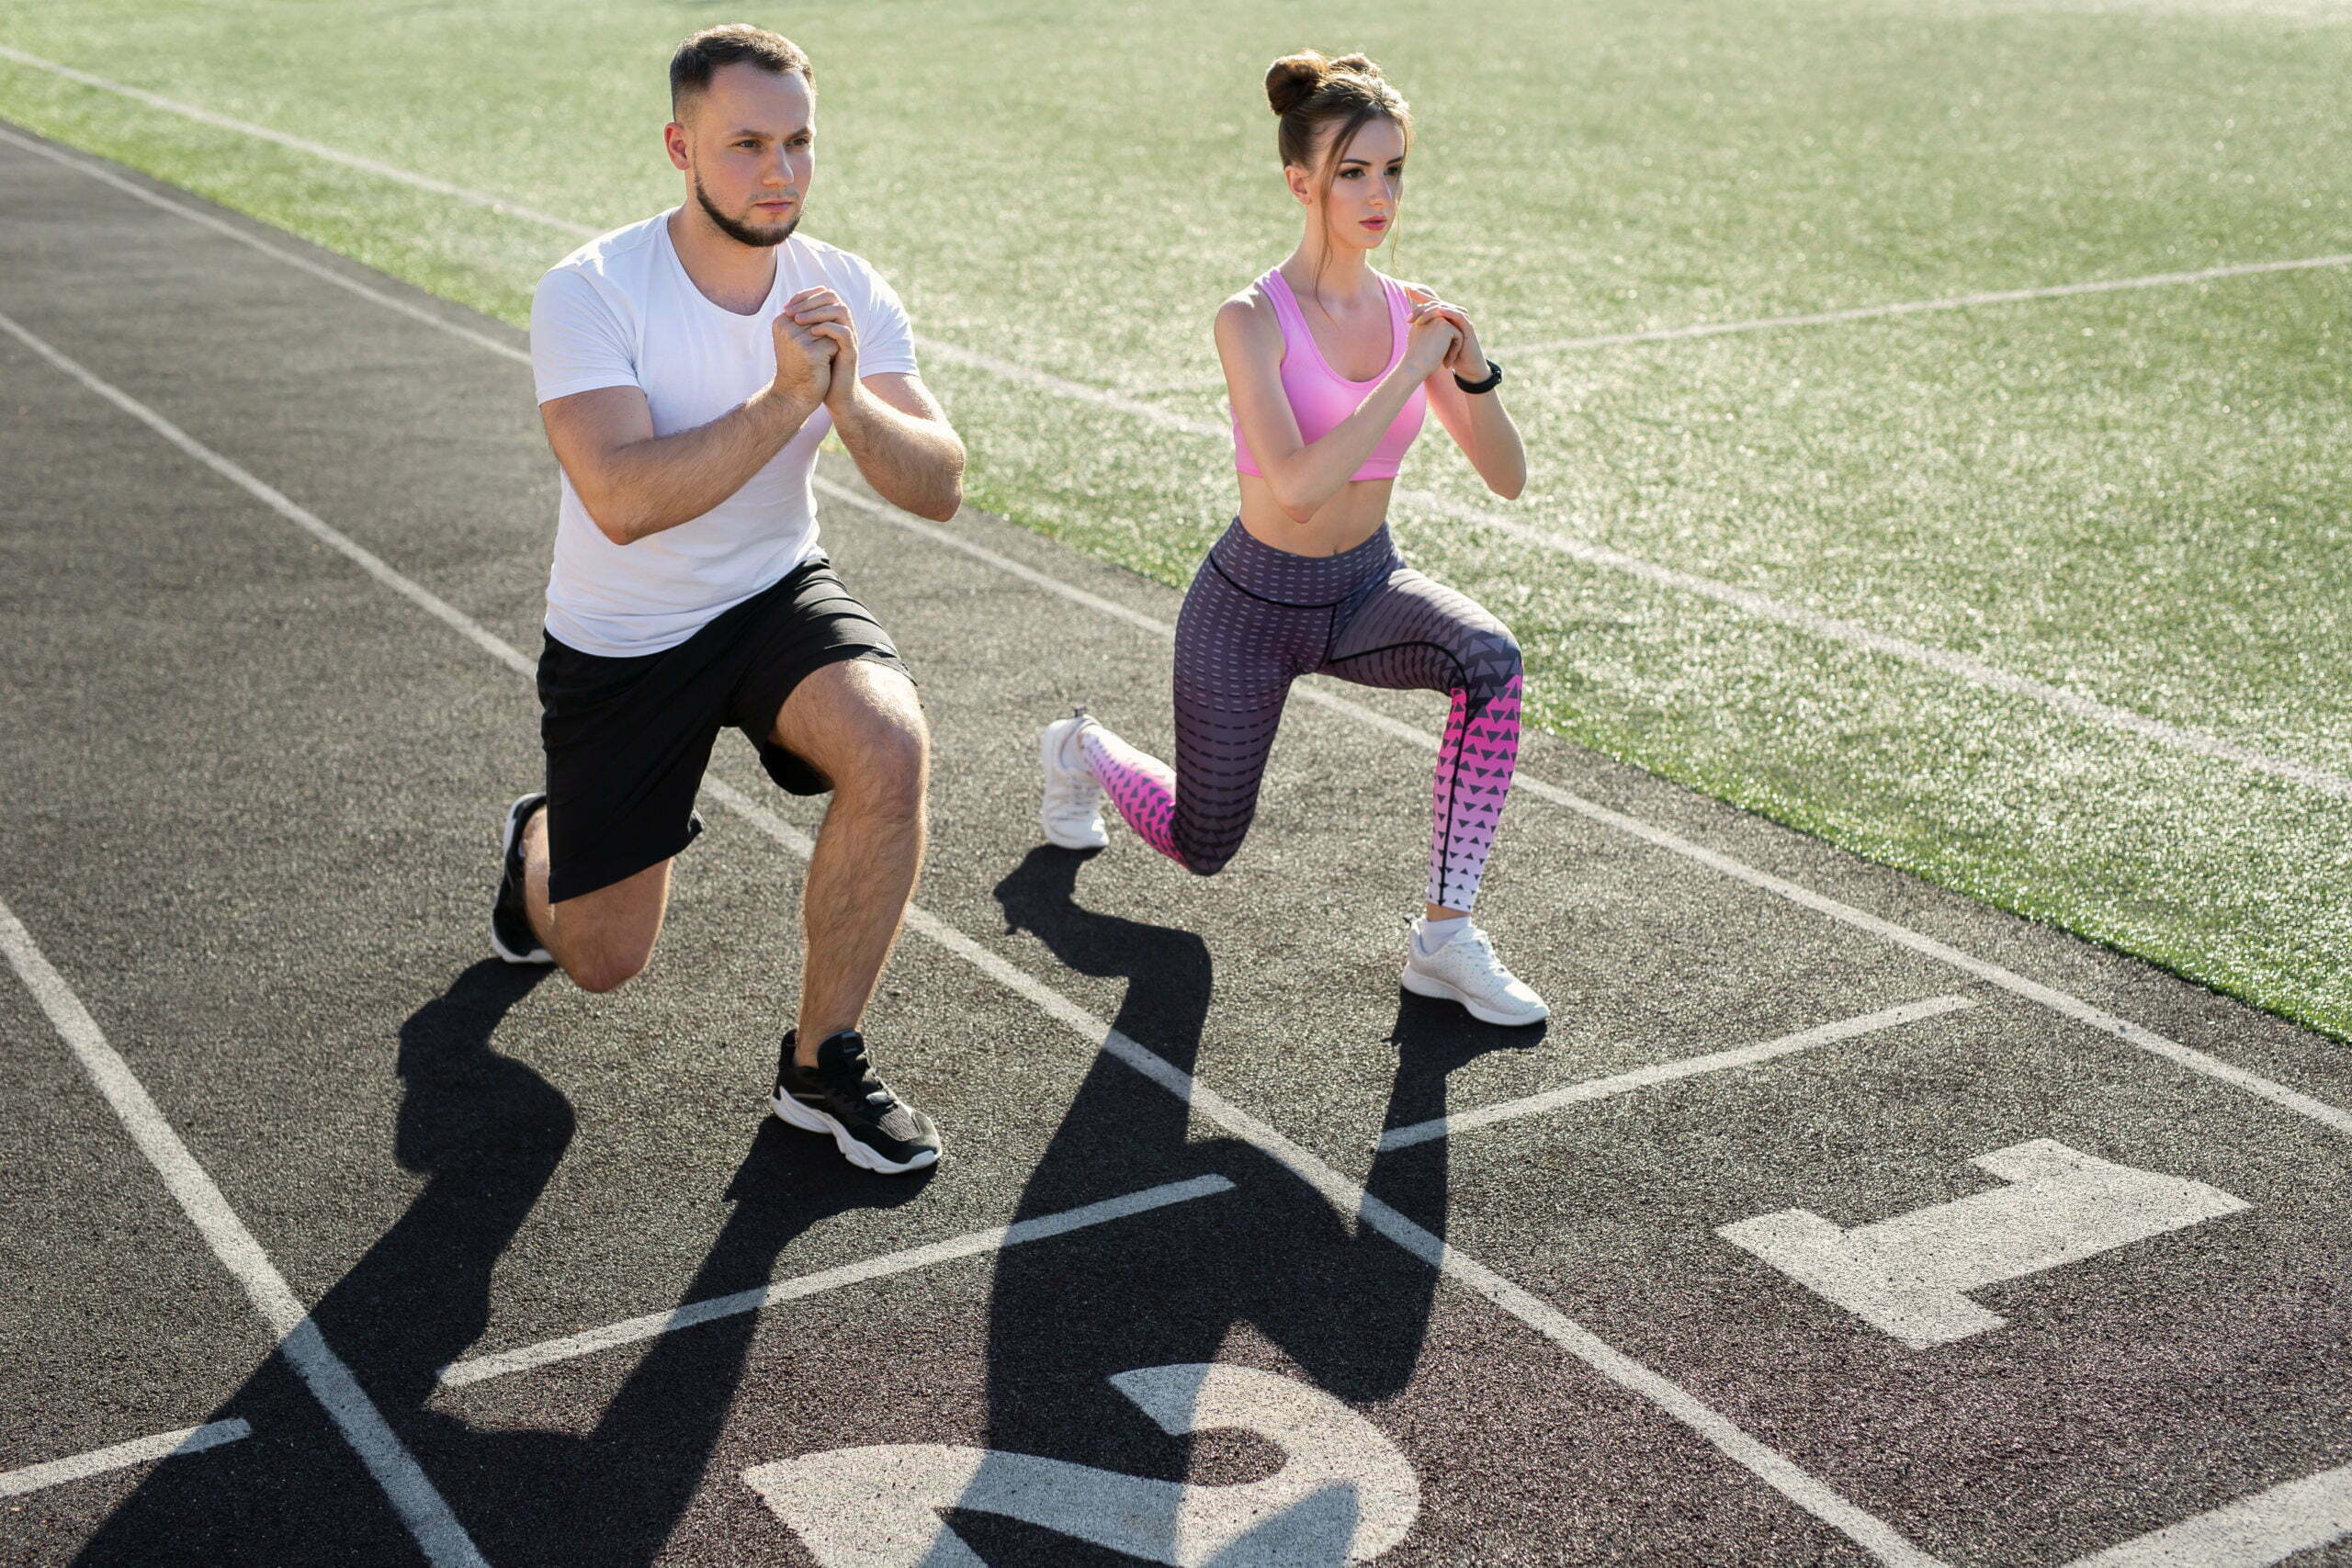 Man and a woman play sports at the stadium in the summer, making lunges.